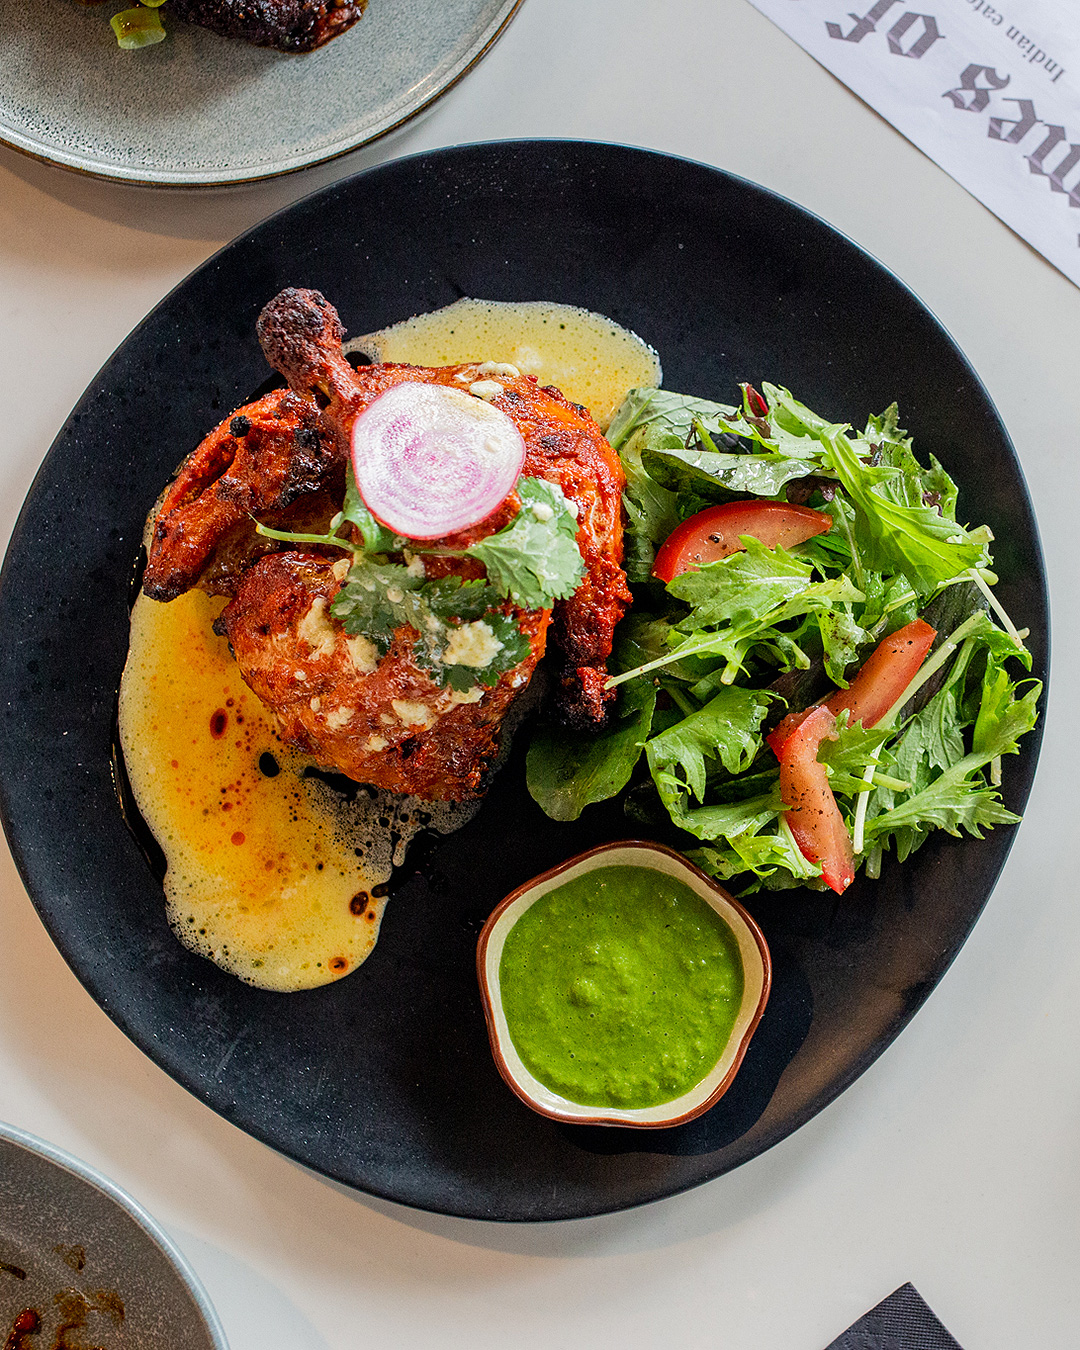 Delicious tandoori chicken at Times Of India, one of the best Indian restaurants in Auckland.